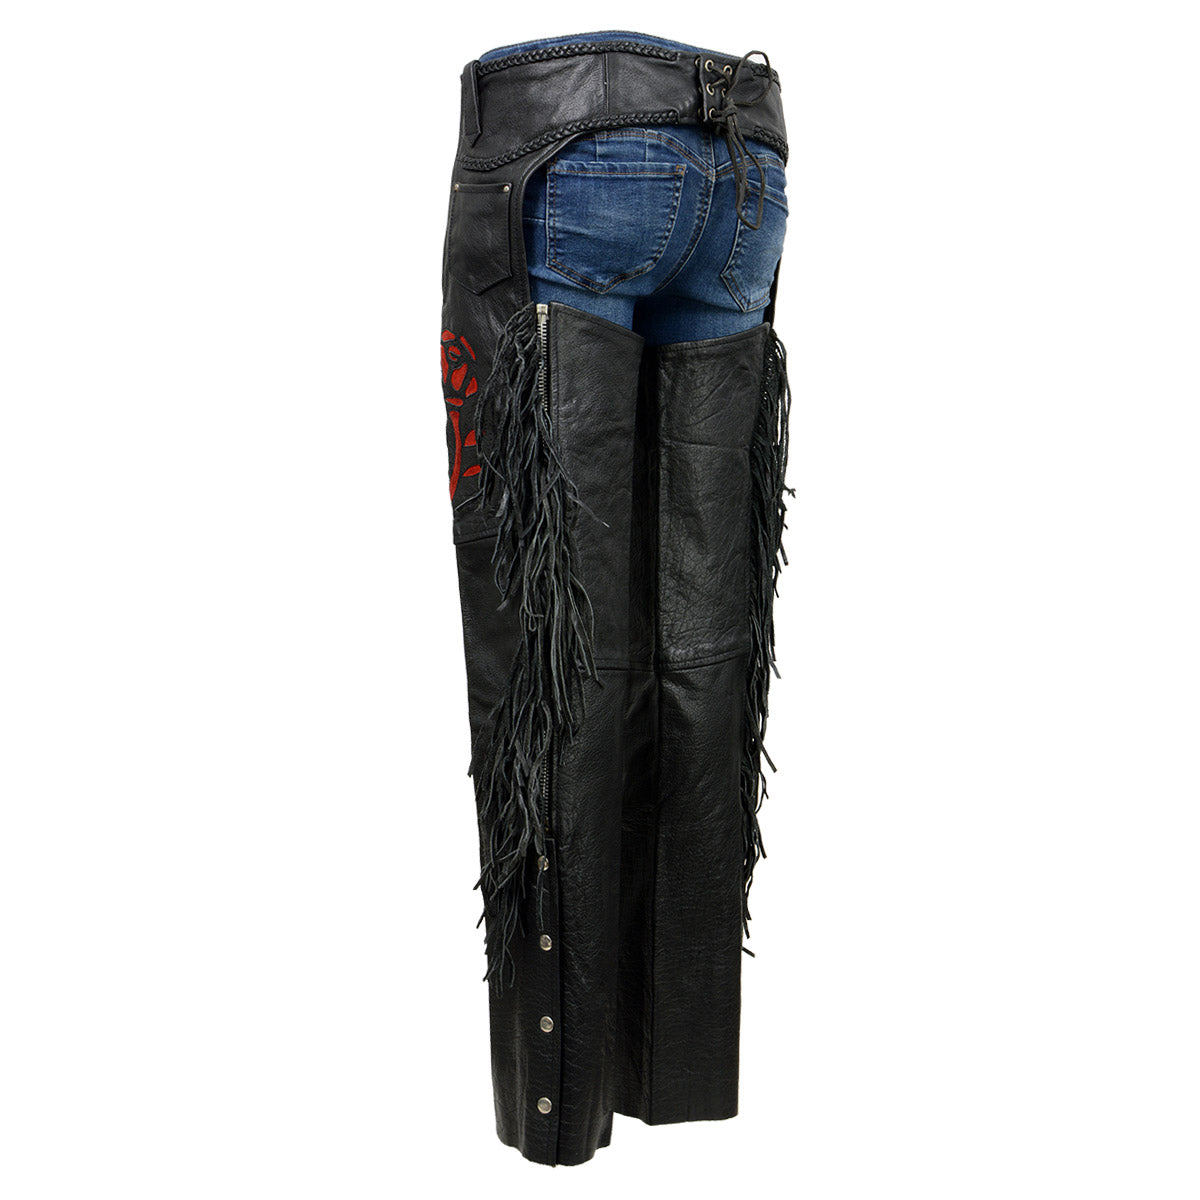 Milwaukee Leather SH1116 Women's Black Leather 'Red Rose' Fringed Motorcycle Chaps